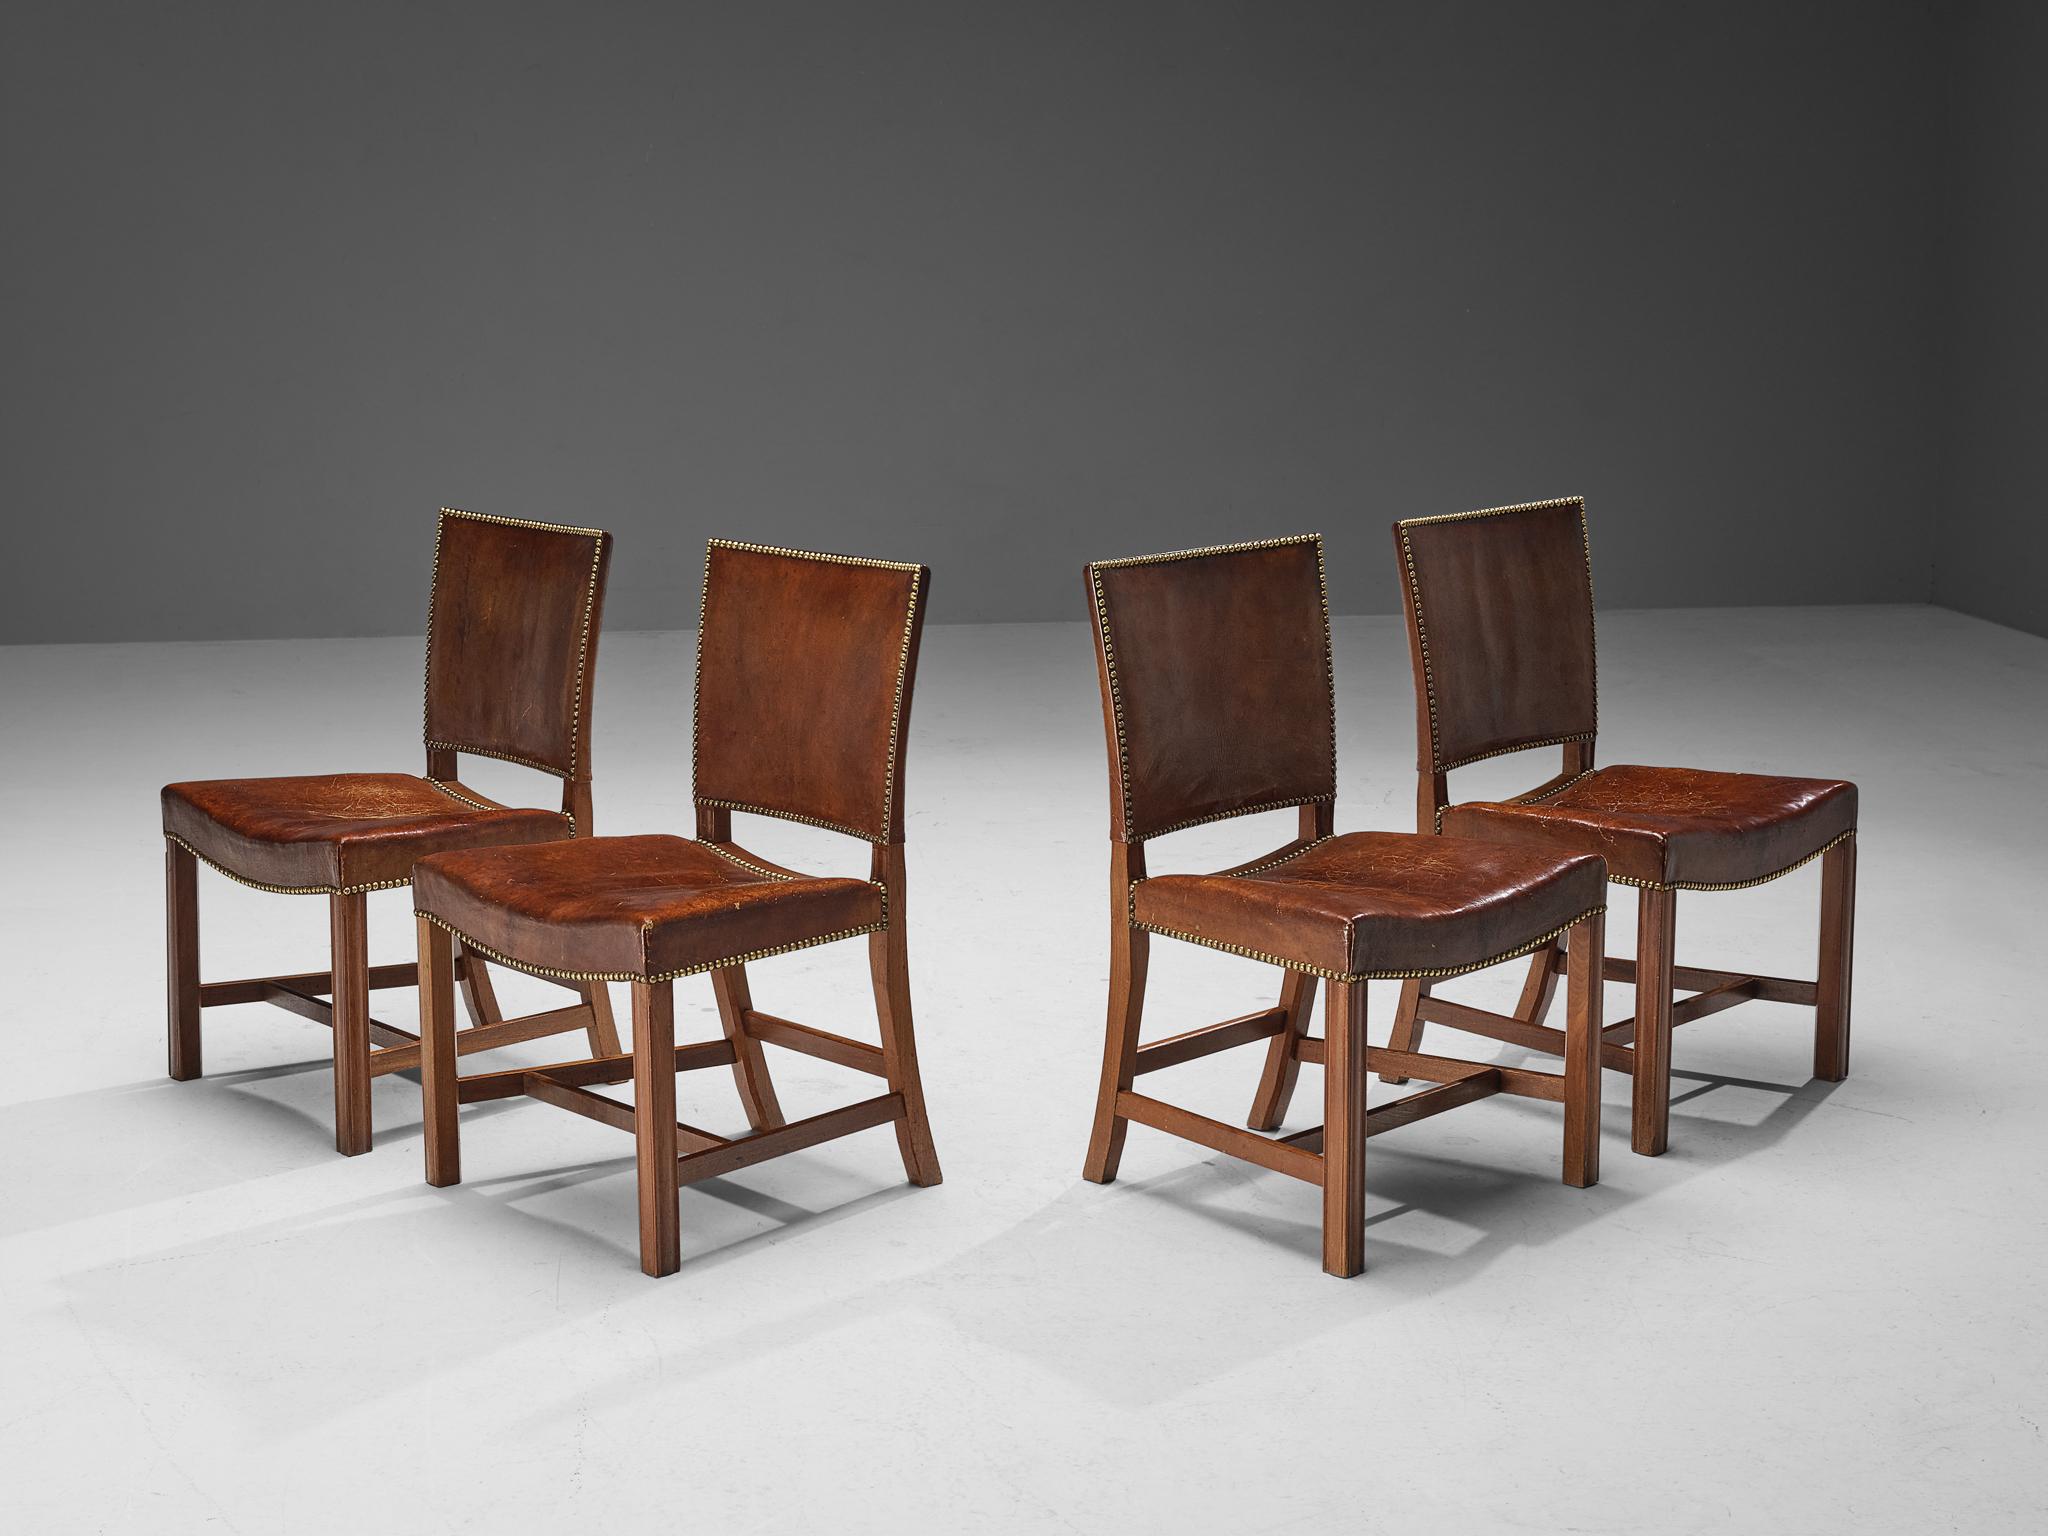 Kaare Klint for Rud Rasmussen, set of four dining chairs, 'The Red Chair', model 3758, original Niger leather, mahogany, brass, Denmark, designed 1927, manufactured 1930s

These dining chairs in brown leather upholstery are designed in 1927 and